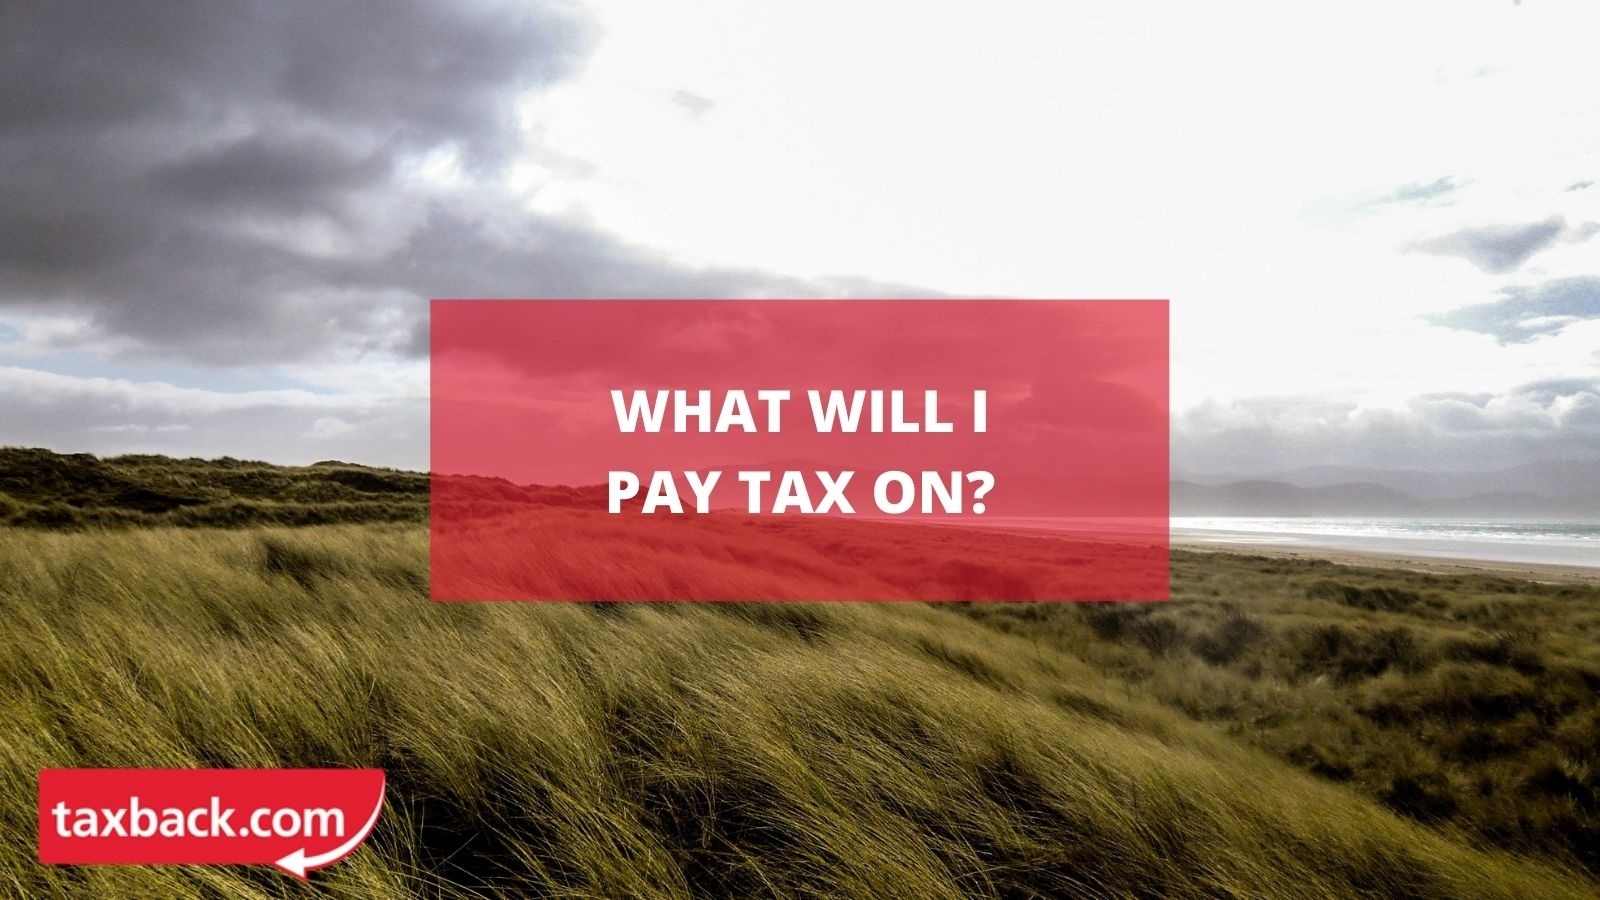 What will I pay tax on?